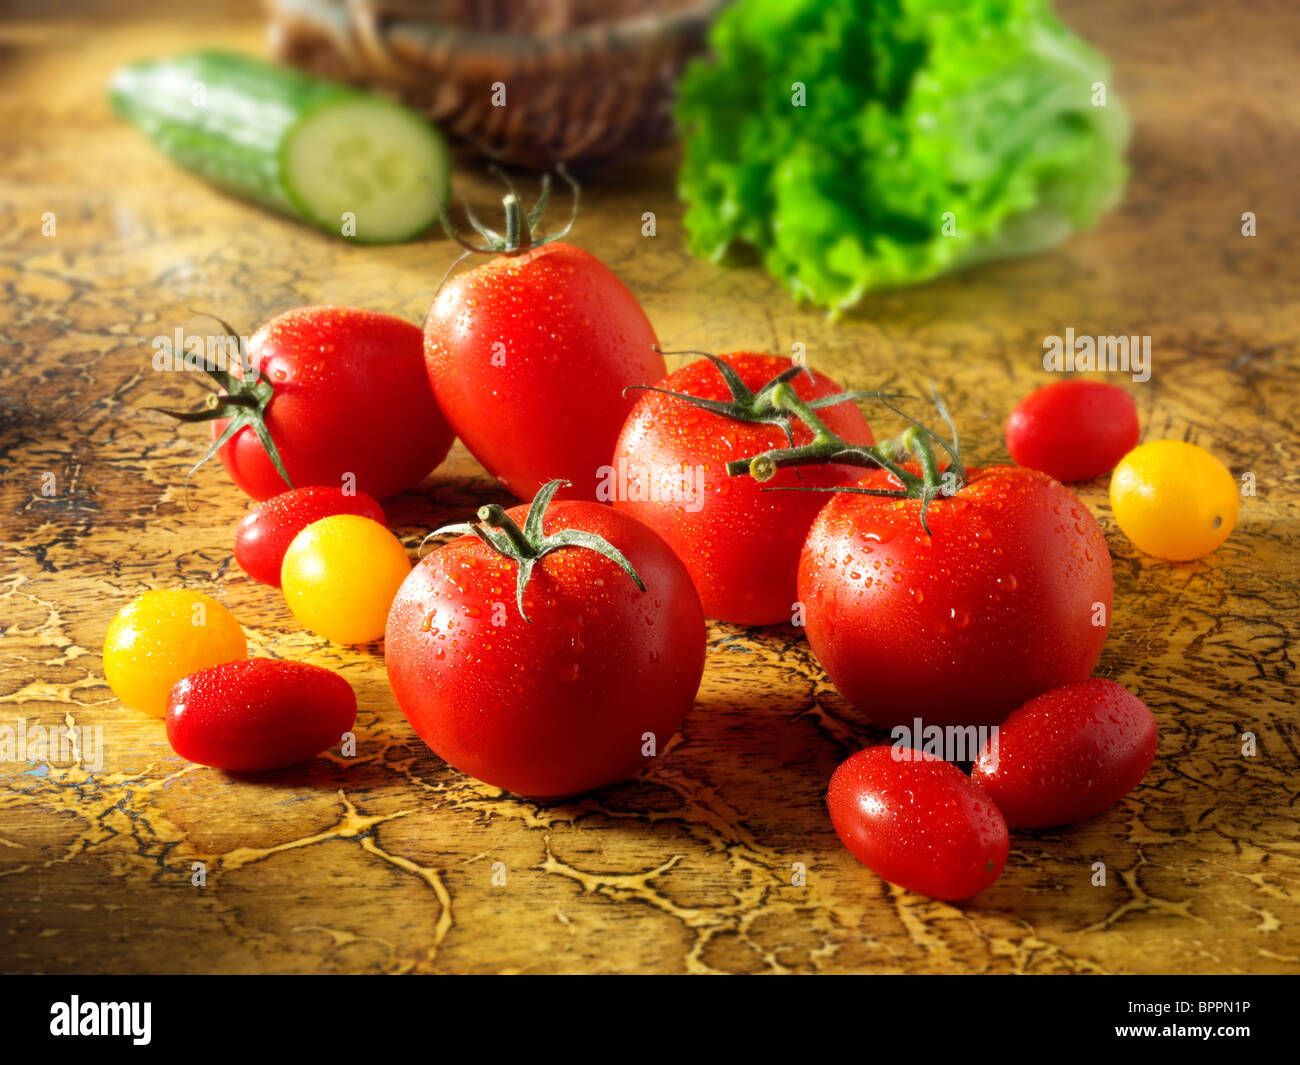 Mixed tomatoes photos, pictures & images Stock Photo